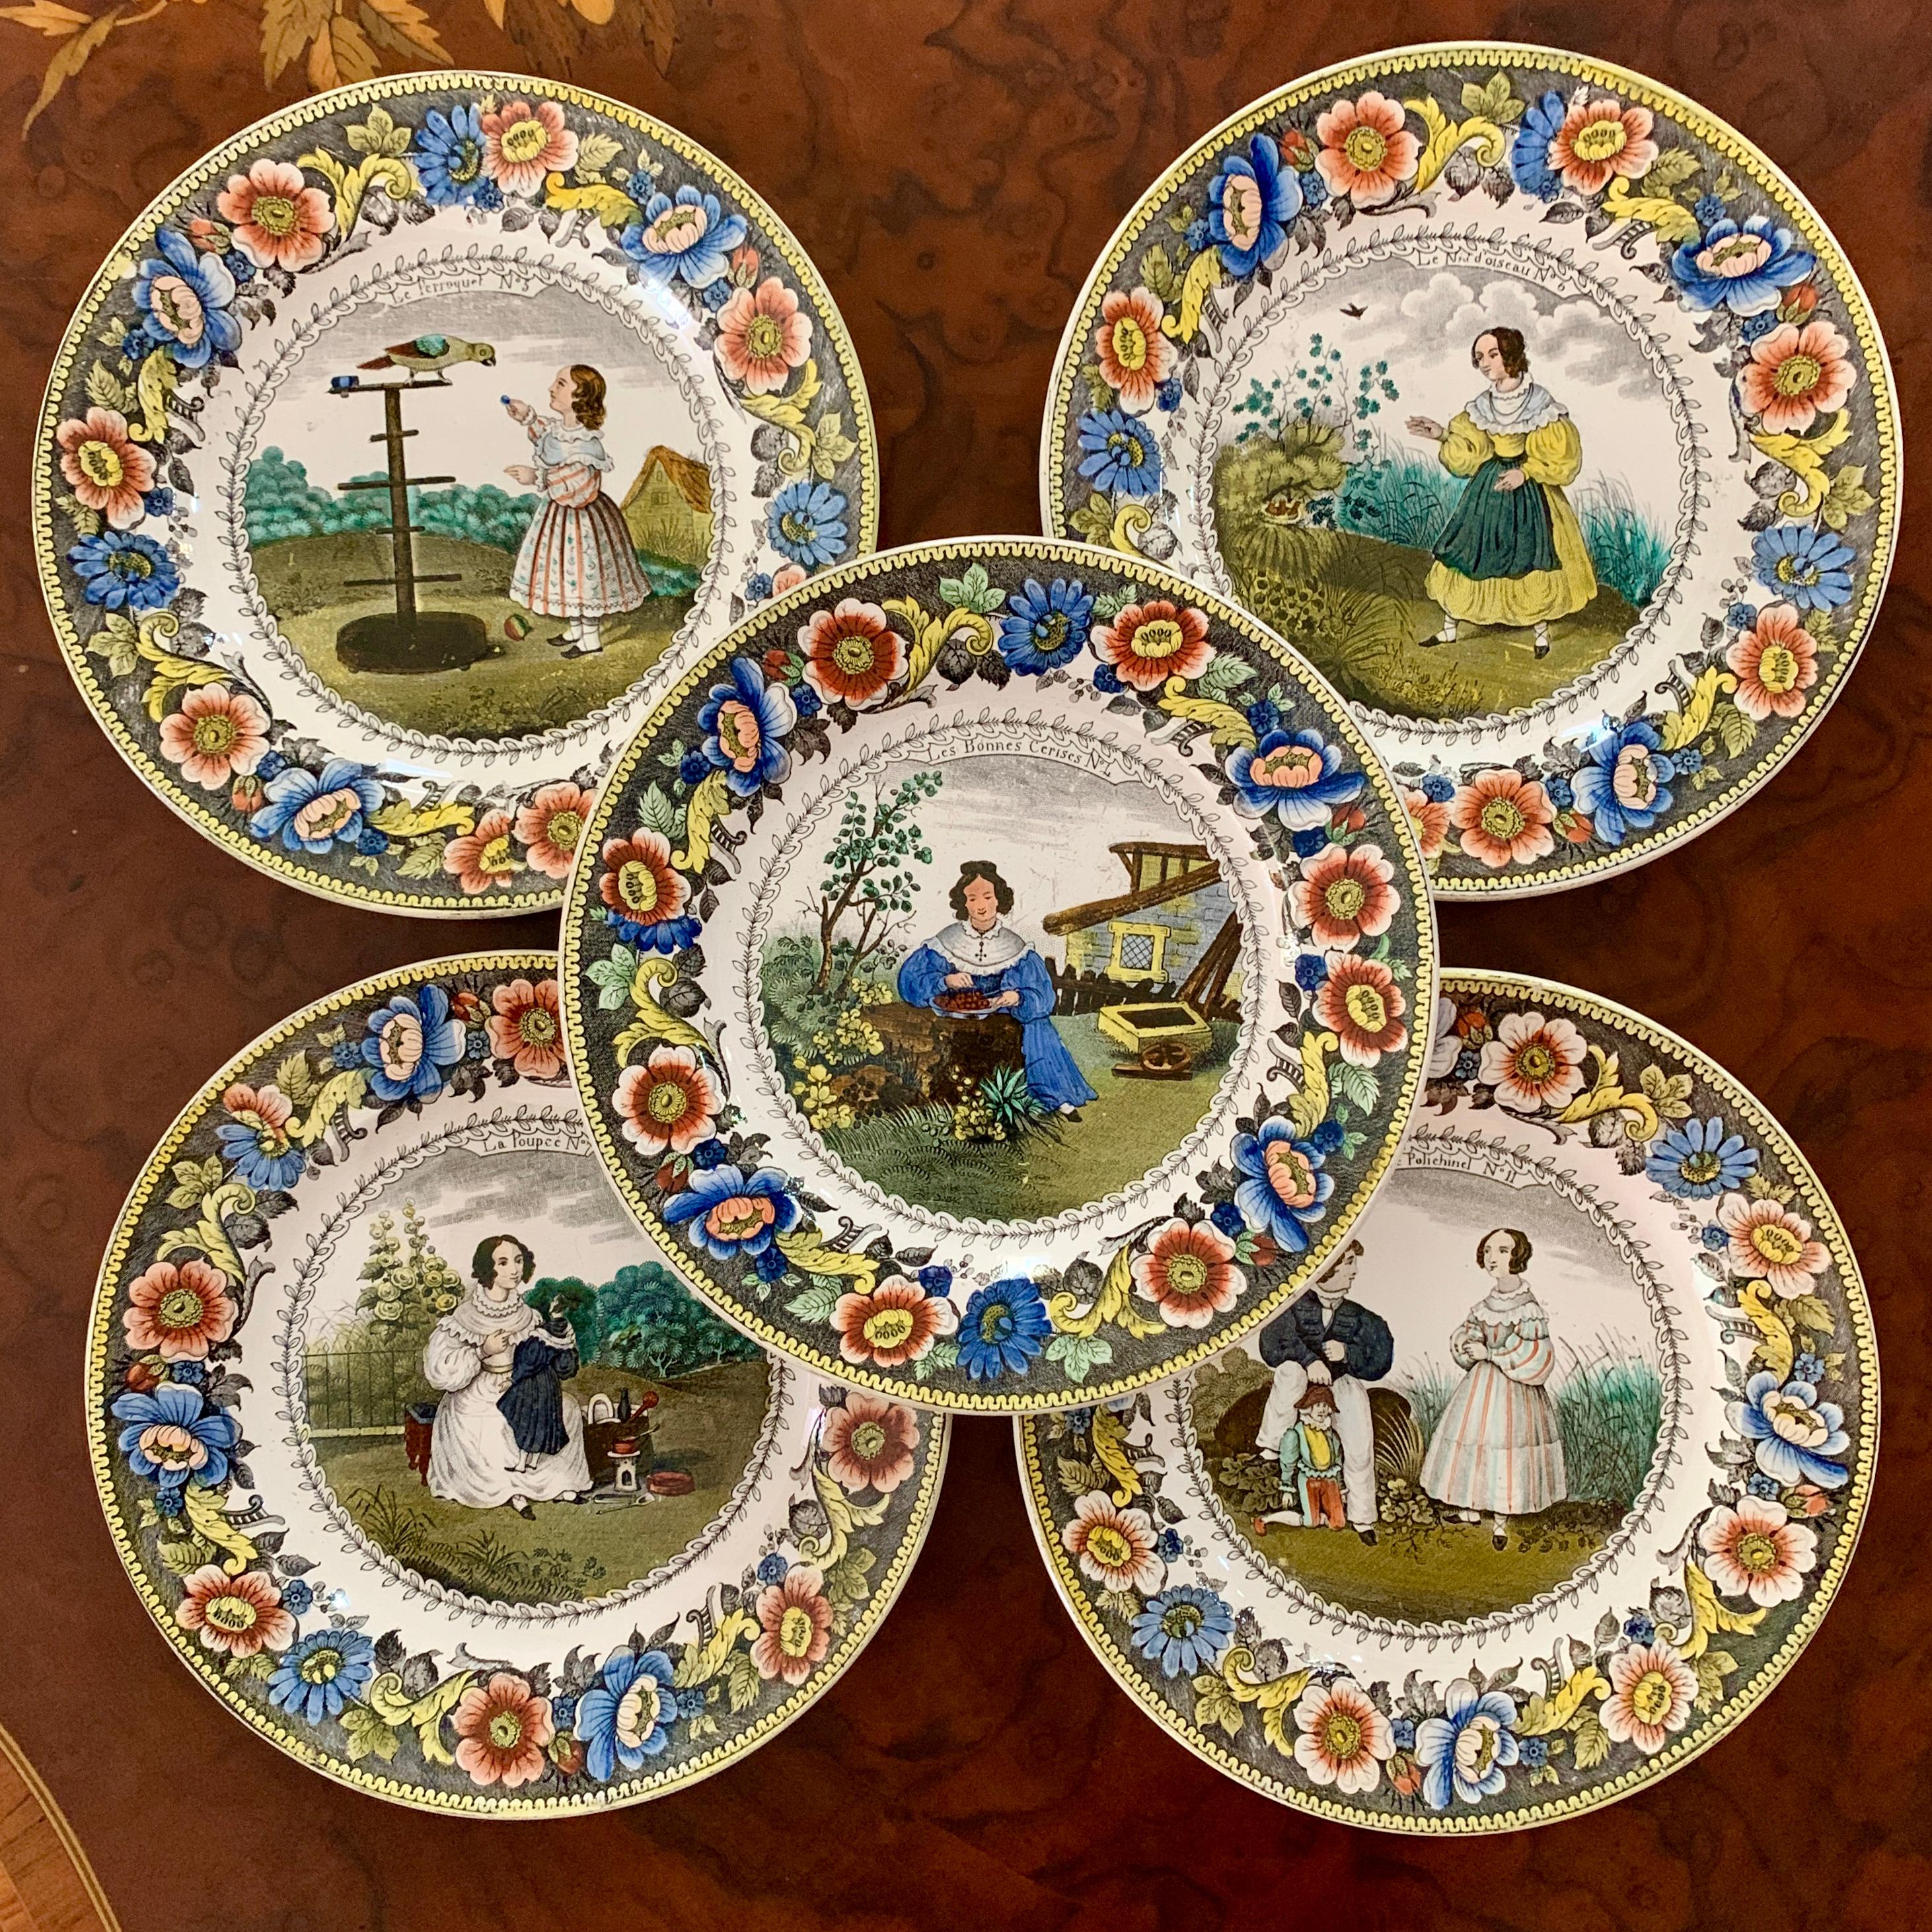 From the Creil region of Northern France, a transfer printed polychrome plate, titled – Le Nid d’oiseau (the birds nest) Circa 1830.

The image shows No. 6 from a series of twelve. A young lady in a yellow period dress, comes across a nest of baby